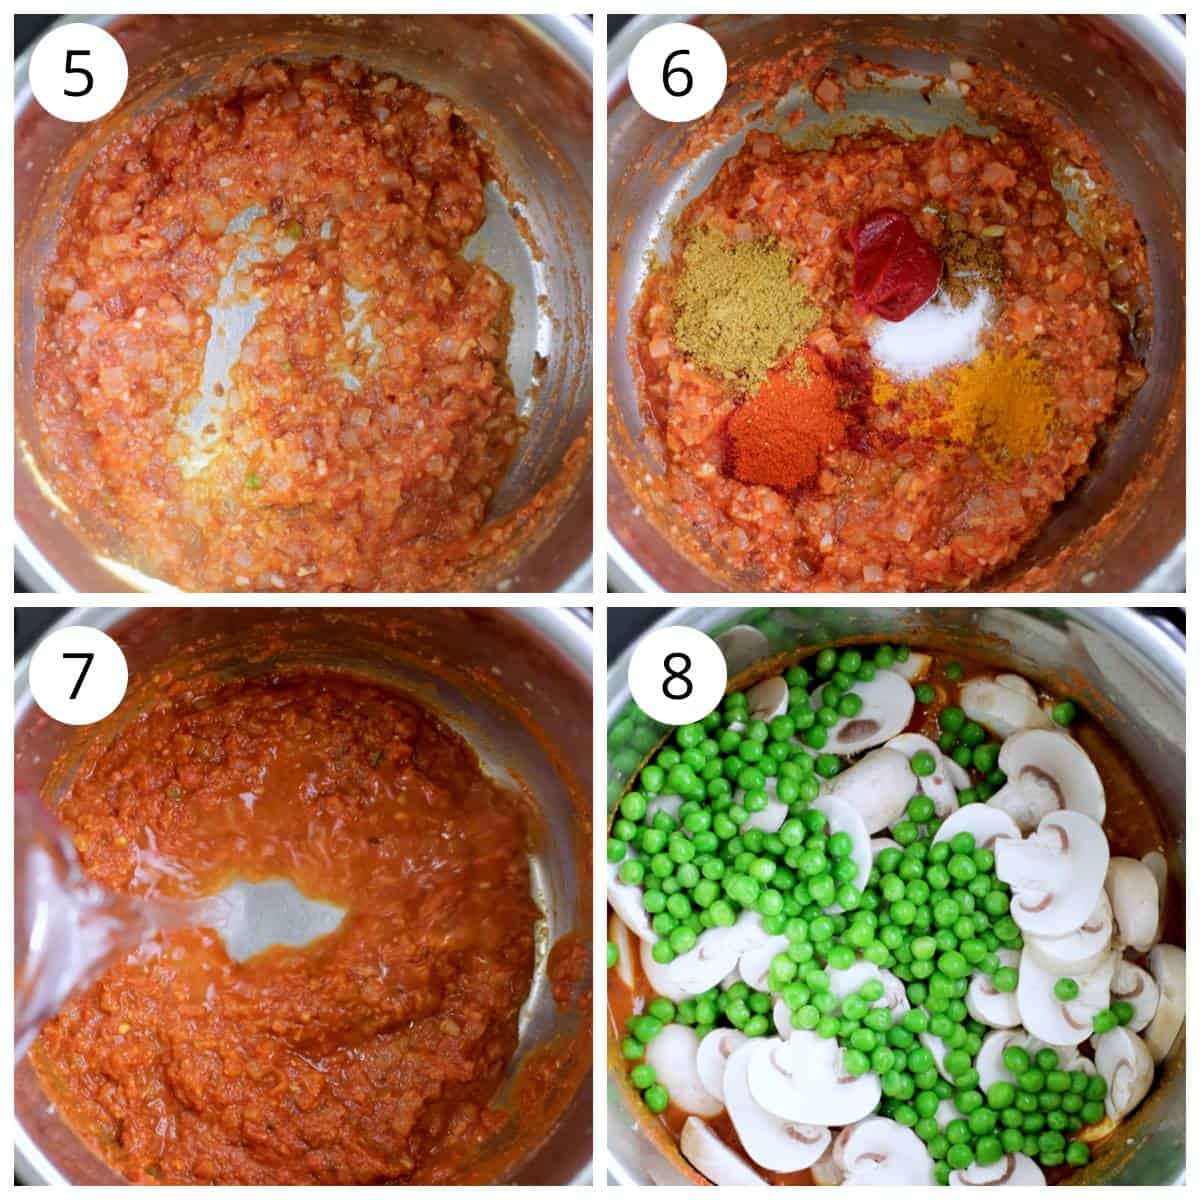 Steps showing making mushroom matar in Instant pot by adding spices, mushroom and peas.